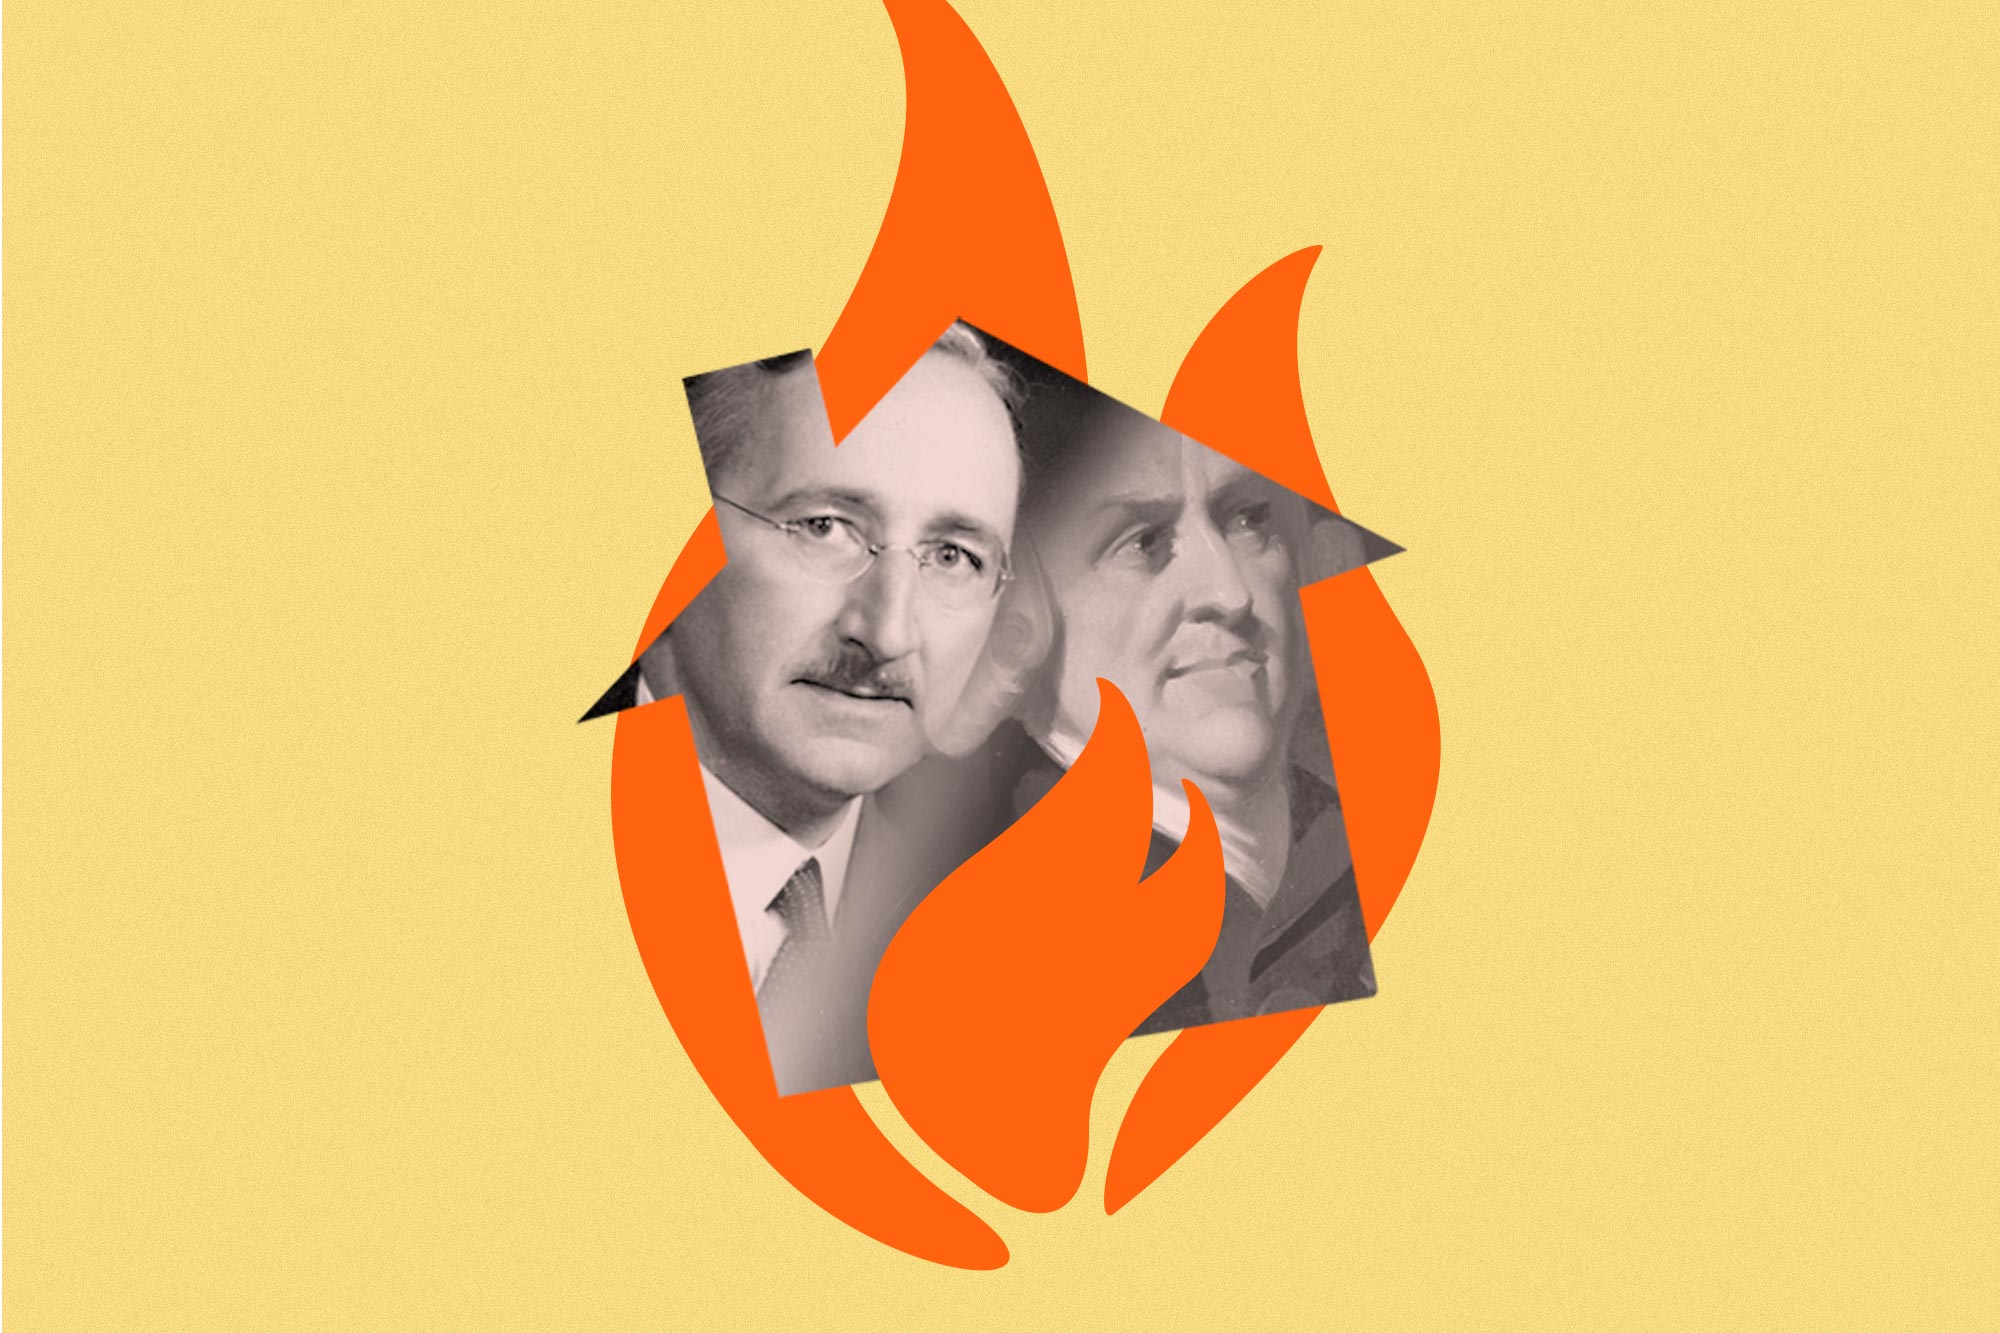 Adam Smith and Friedrich Hayek's faces framed with a house in flames. 